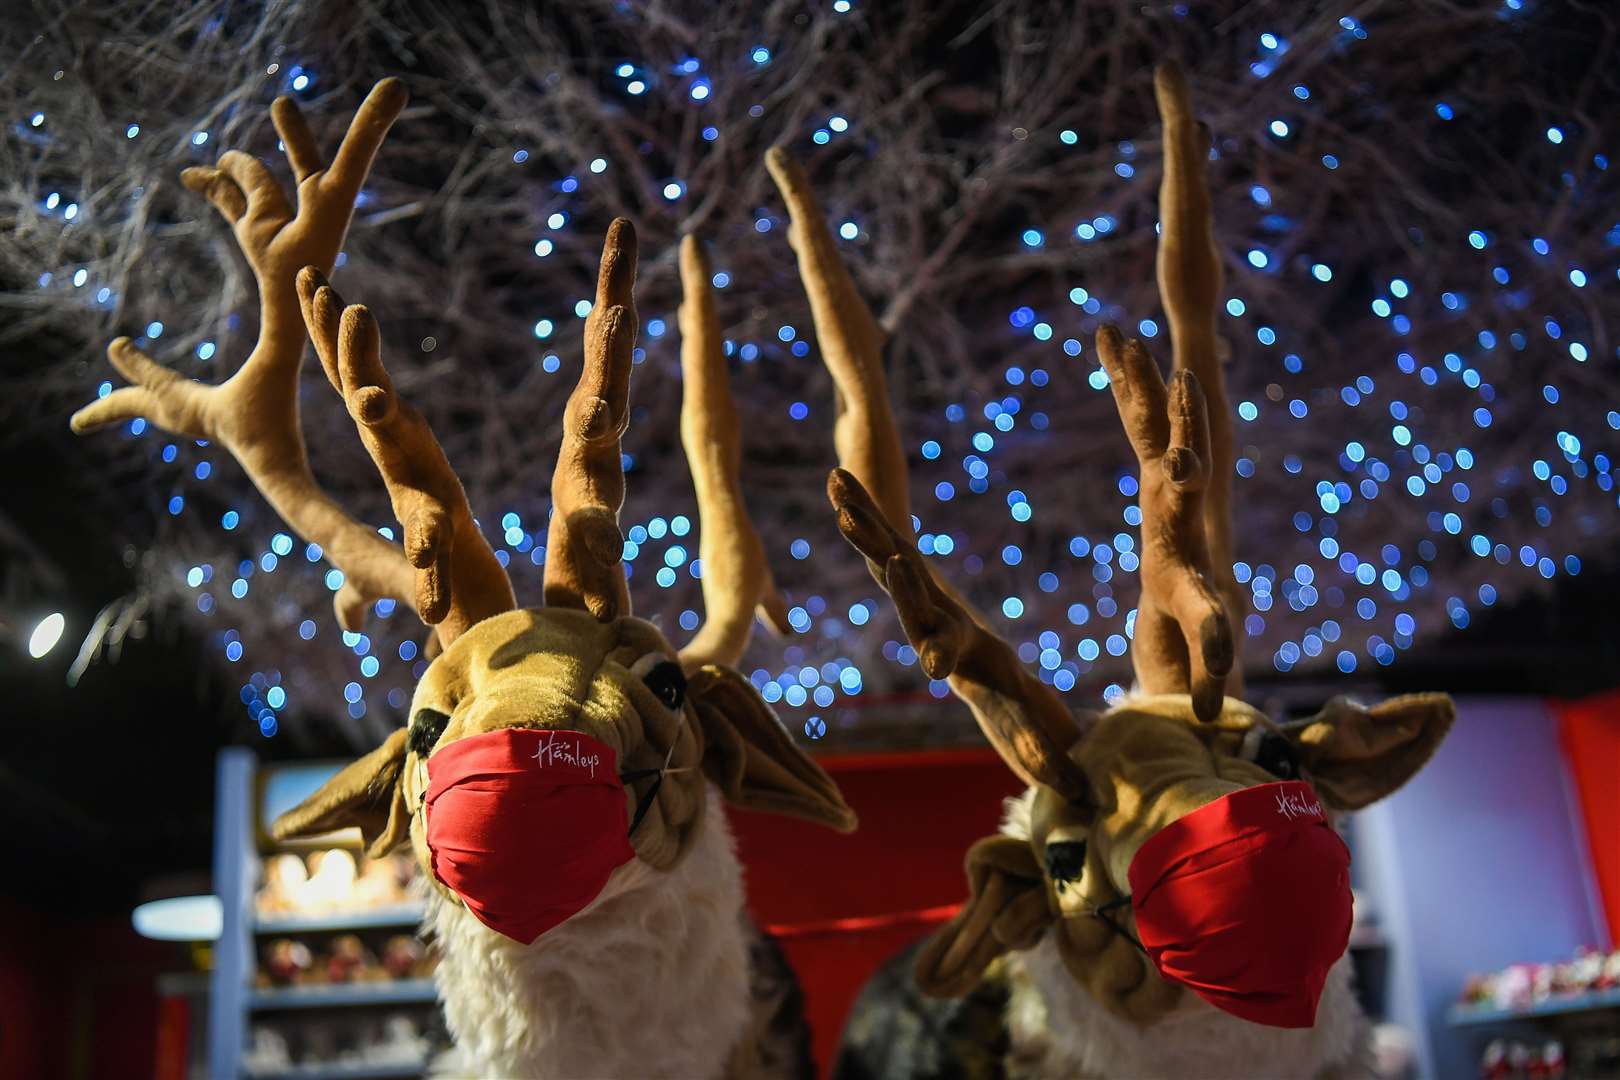 Toy reindeers wearing masks at Hamleys (Kirsty O’Connor/PA)